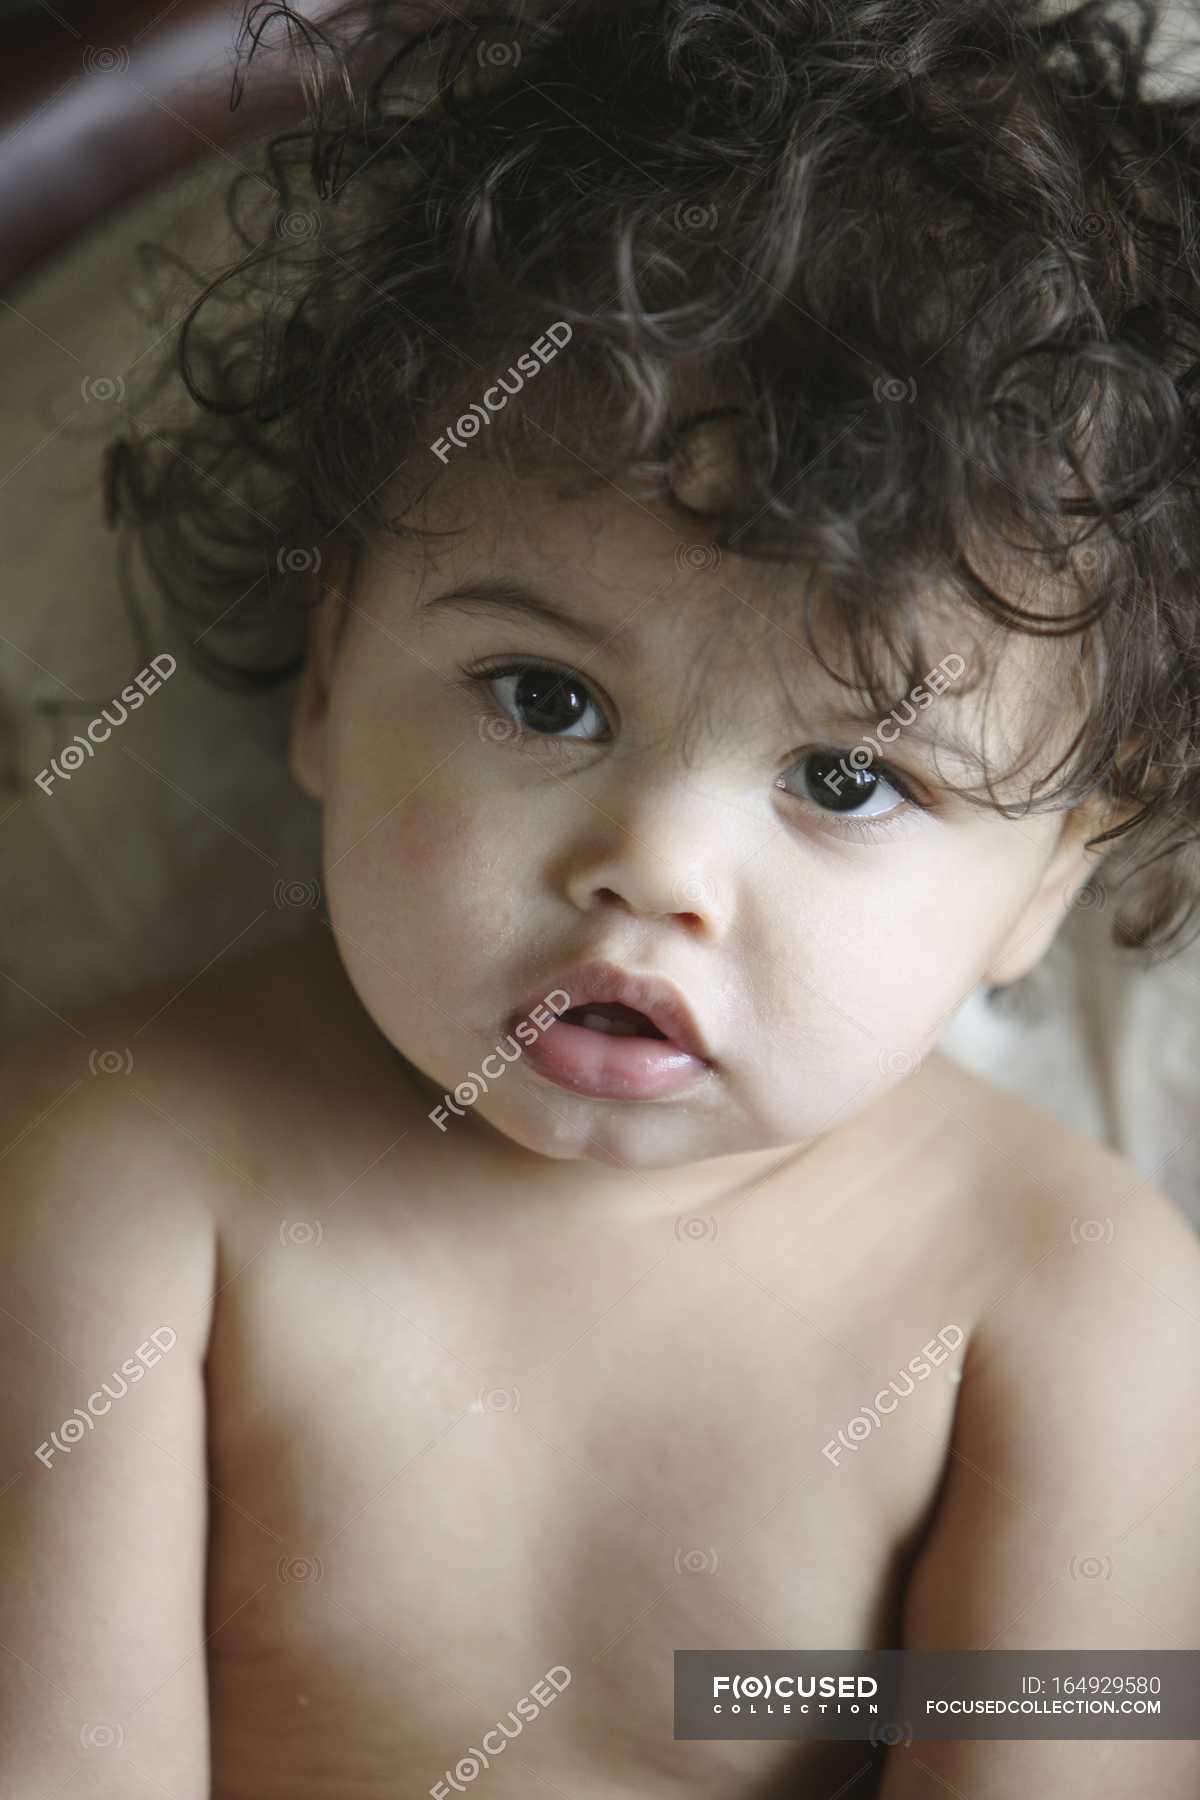 Portrait Of Young Baby Girl With Dark Curly Hair — person, childhood -  Stock Photo | #164929580